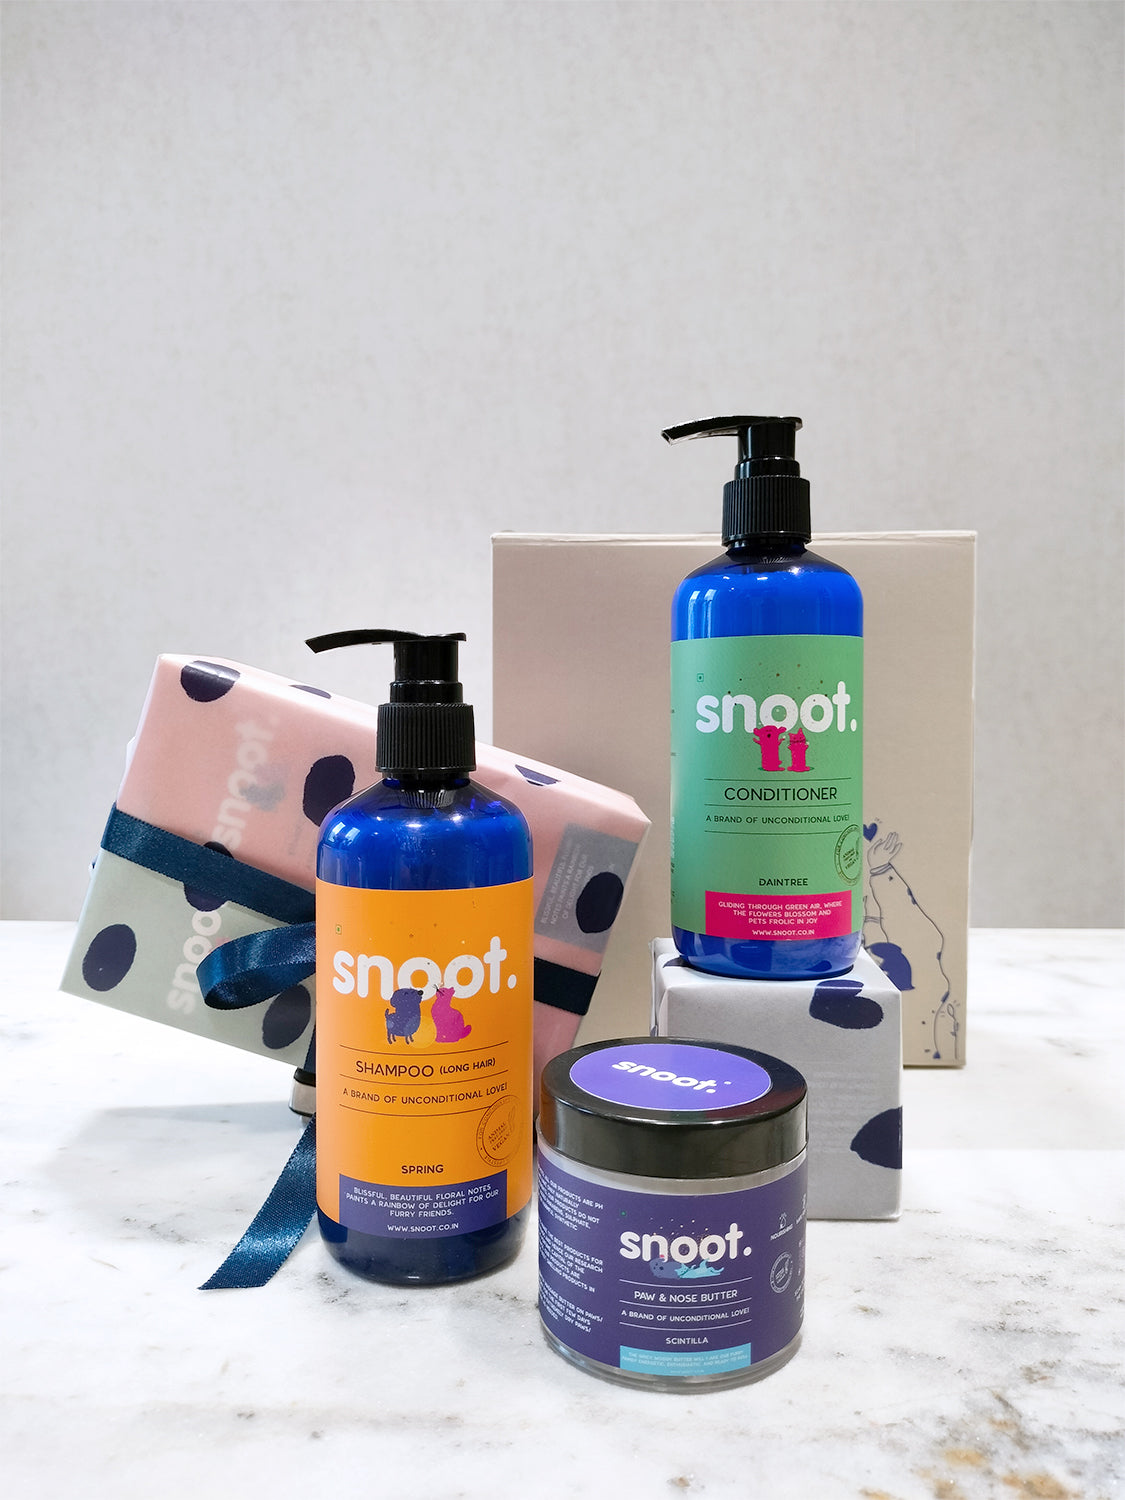 Gift set for pets, dogs and cats containing Shampoo, Conditioner, and Paw & Nose butter